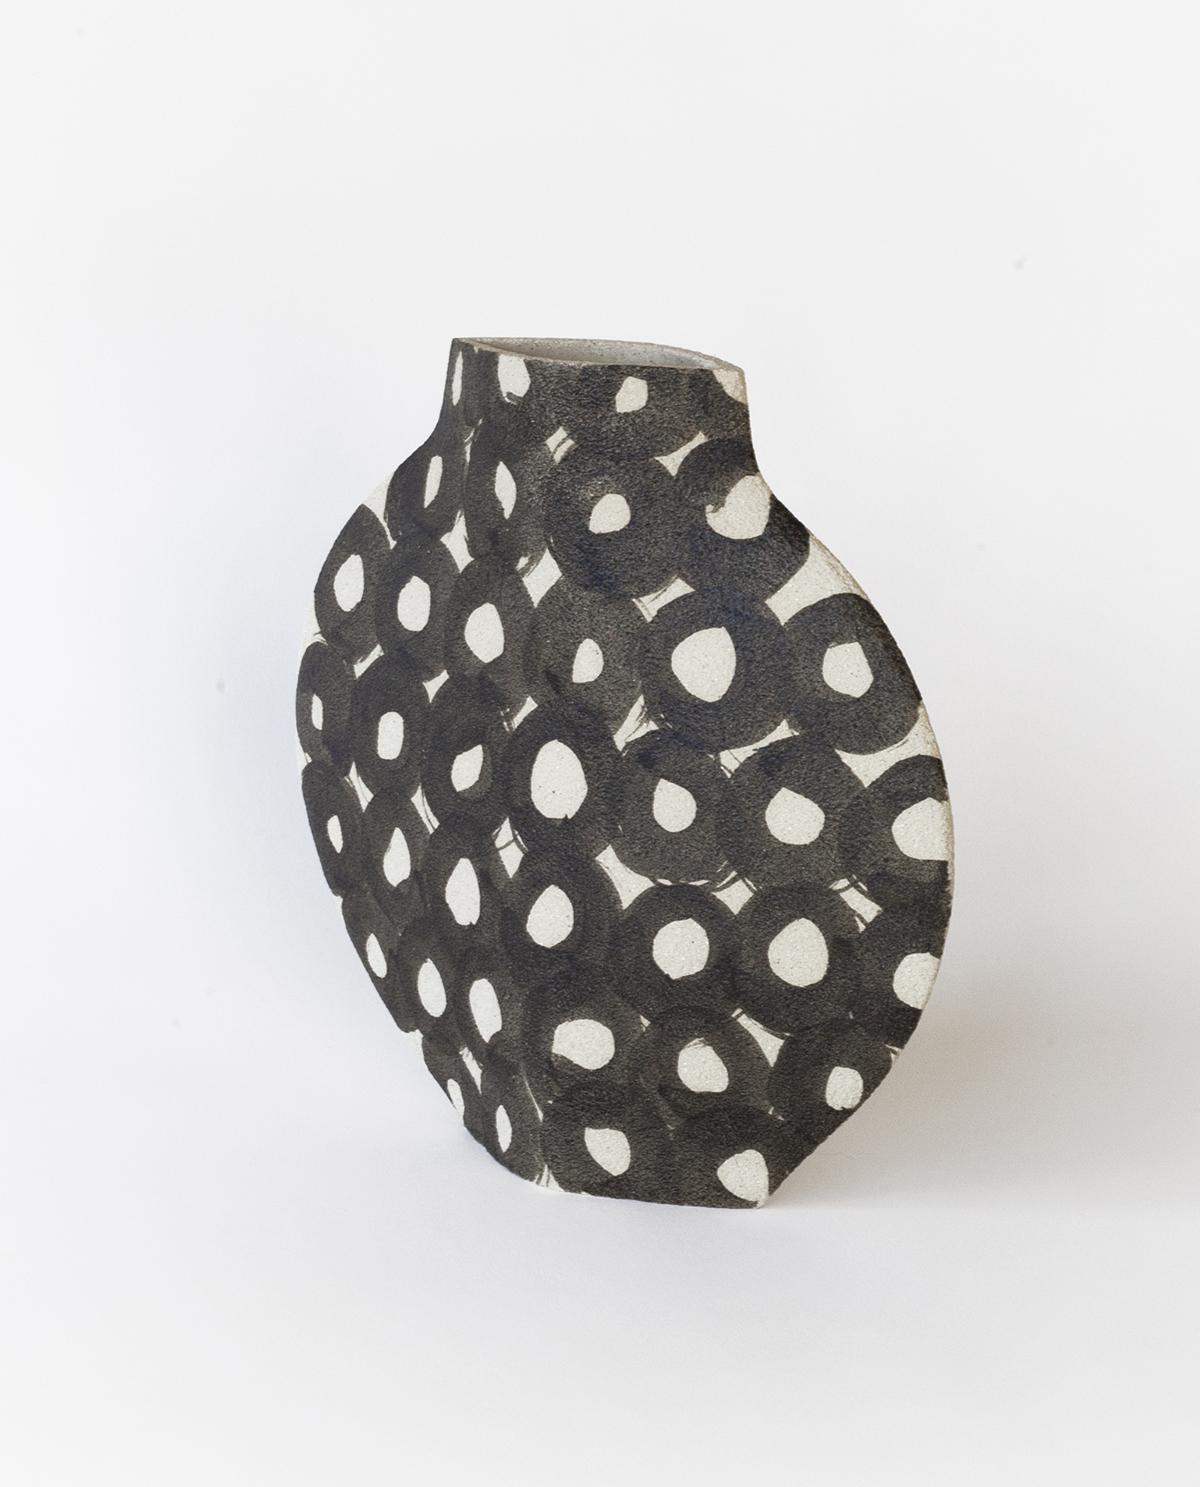 ‘Rounds Pattern’ Handmade White Ceramic Vase

This vase is part of a new series inspired by iconic Art (and more precisely paintings) movements. Here is our Lune [M] model with motifs based on abstract paintings. They are hand-painted on the vase